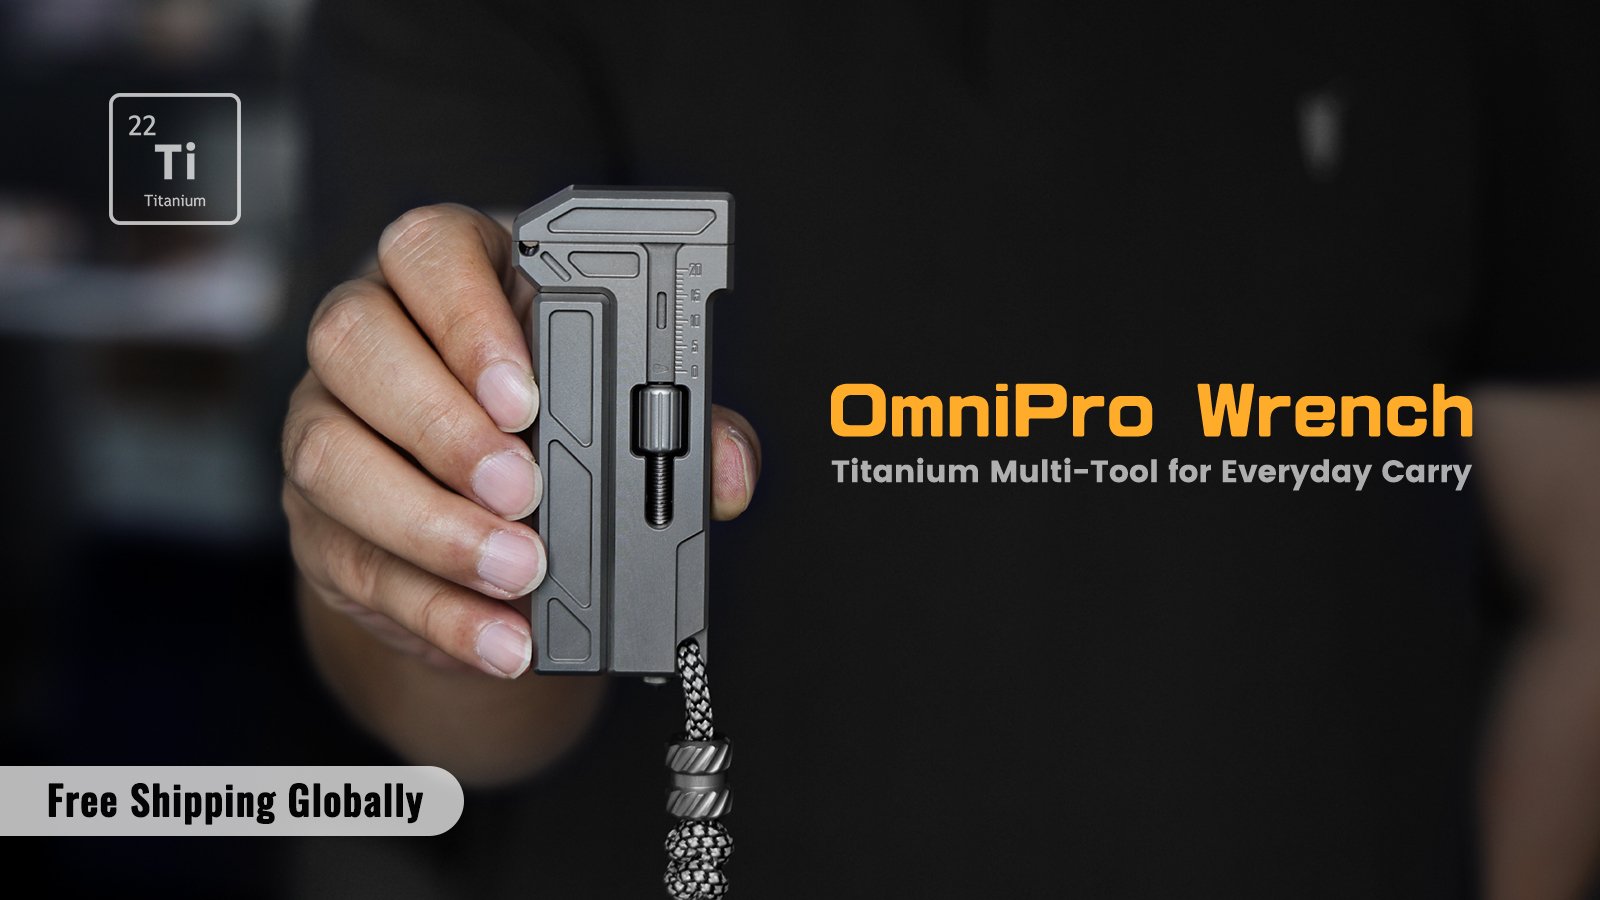 The OmniPro Wrench - Titanium Multi-Tool for Everyday Carry